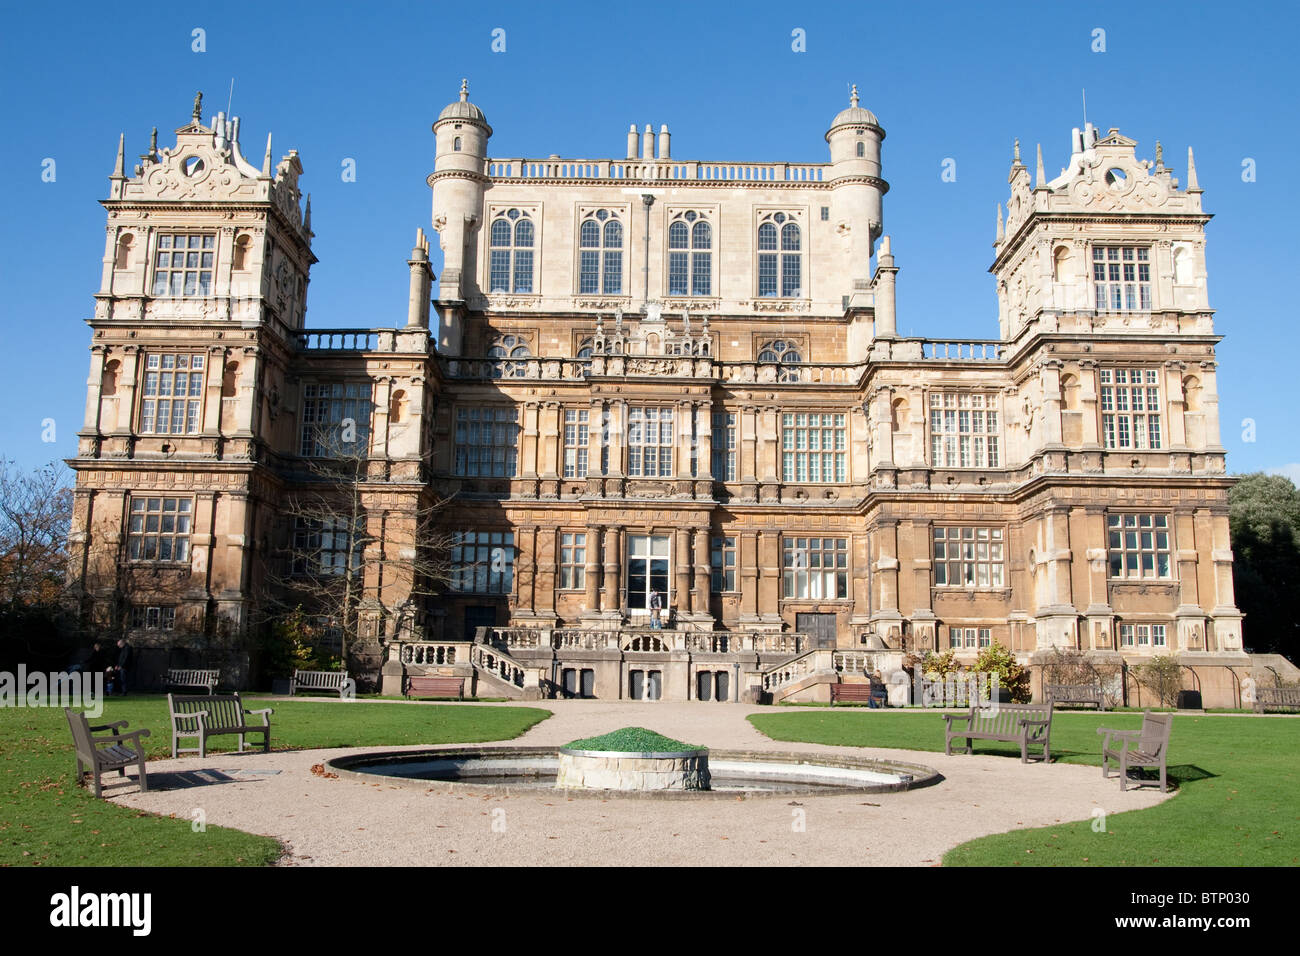 Wollaton Hall à Wollaton Park, Nottingham (Angleterre) Banque D'Images